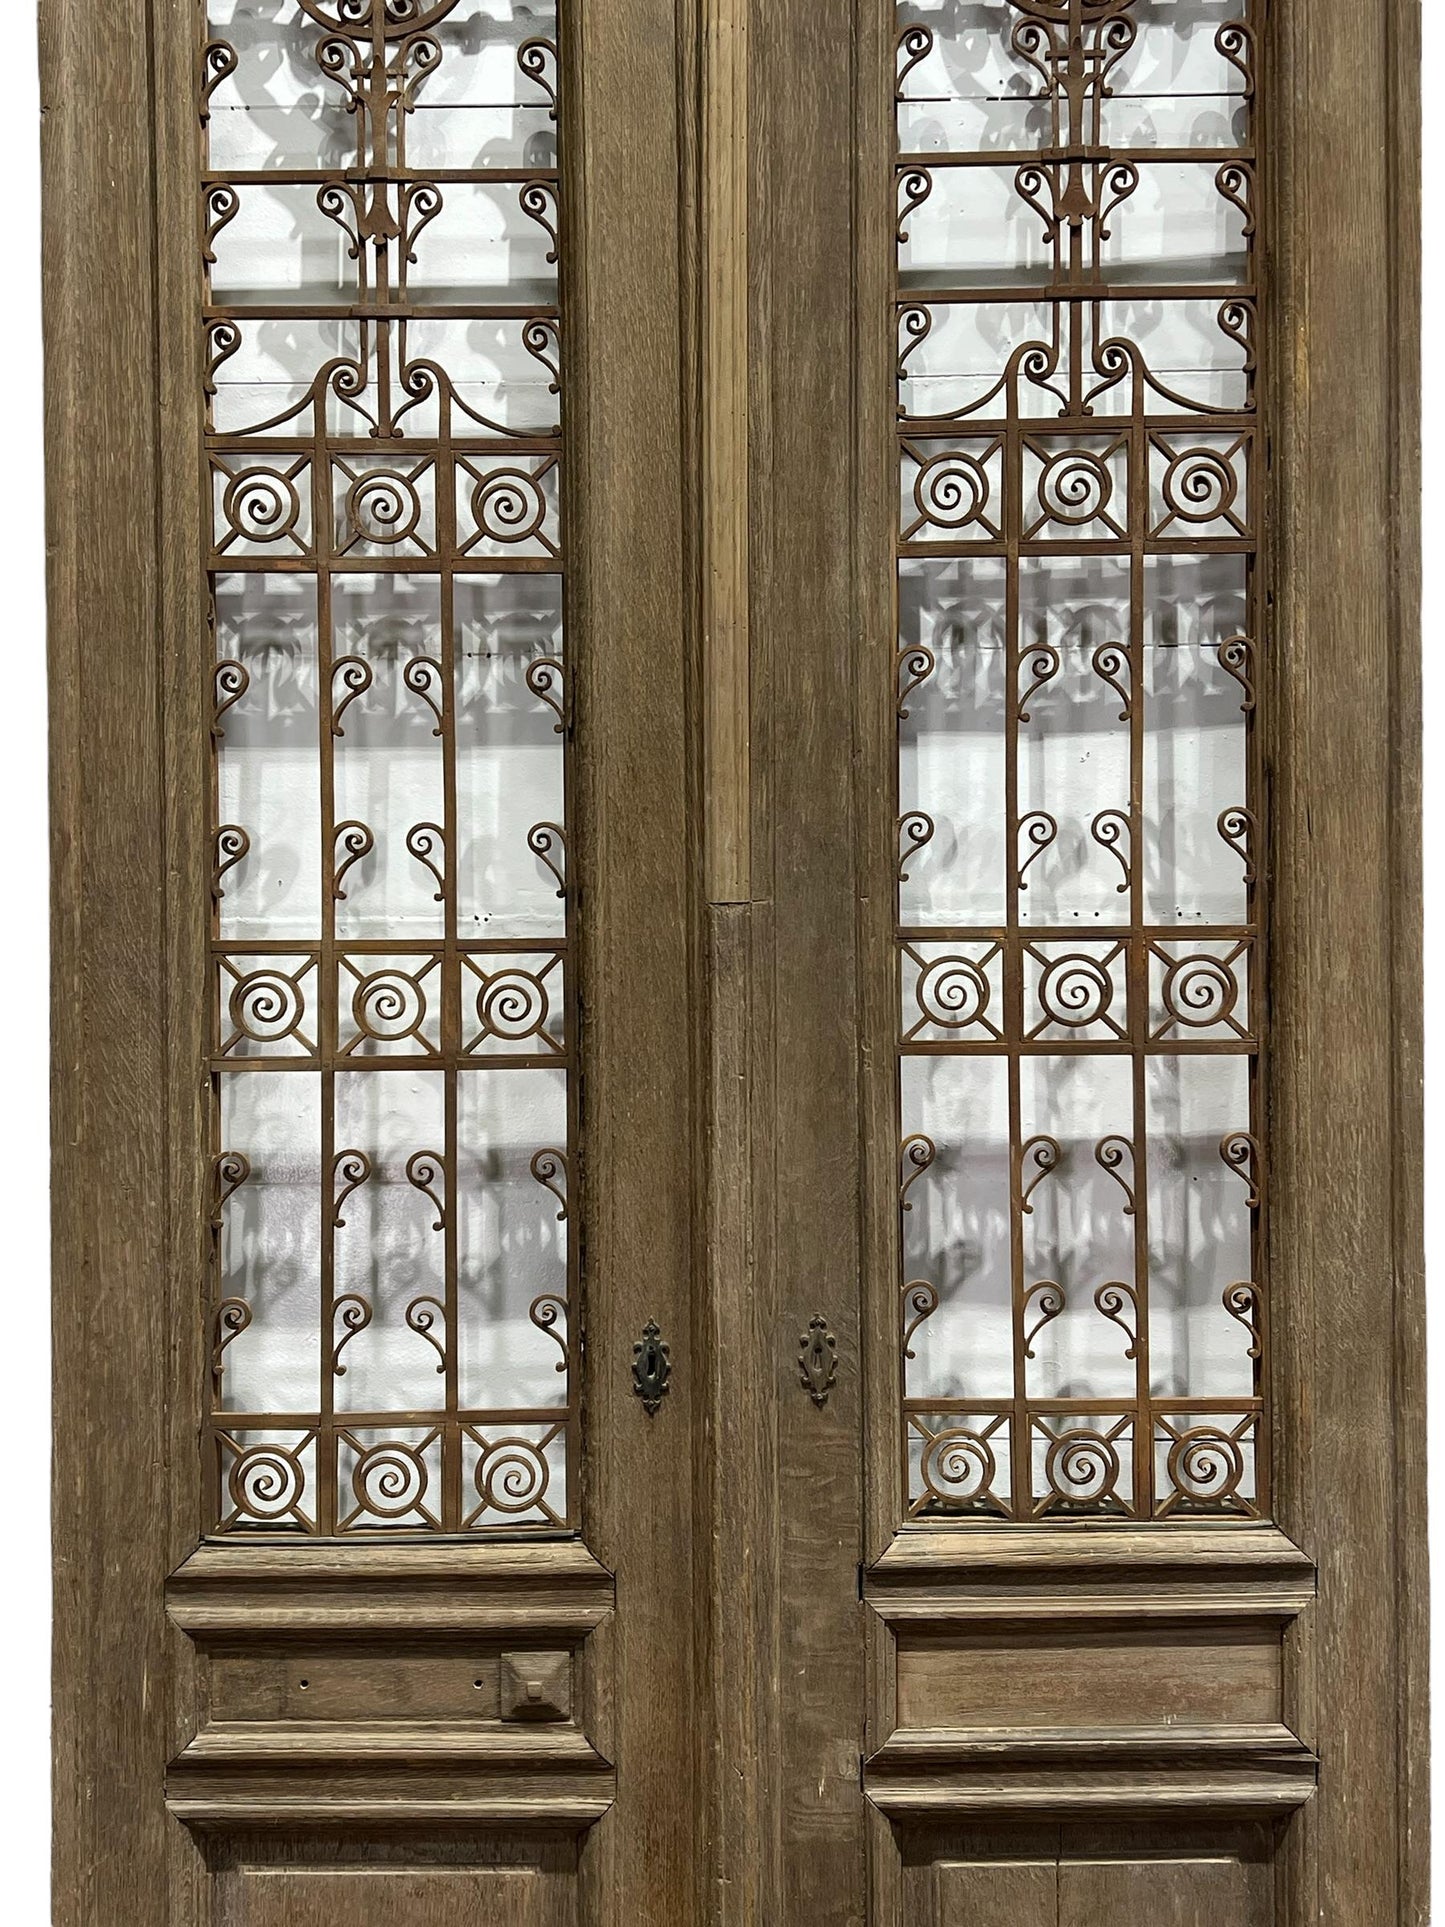 Pair of Antique French Doors with Iron Work (no glass)